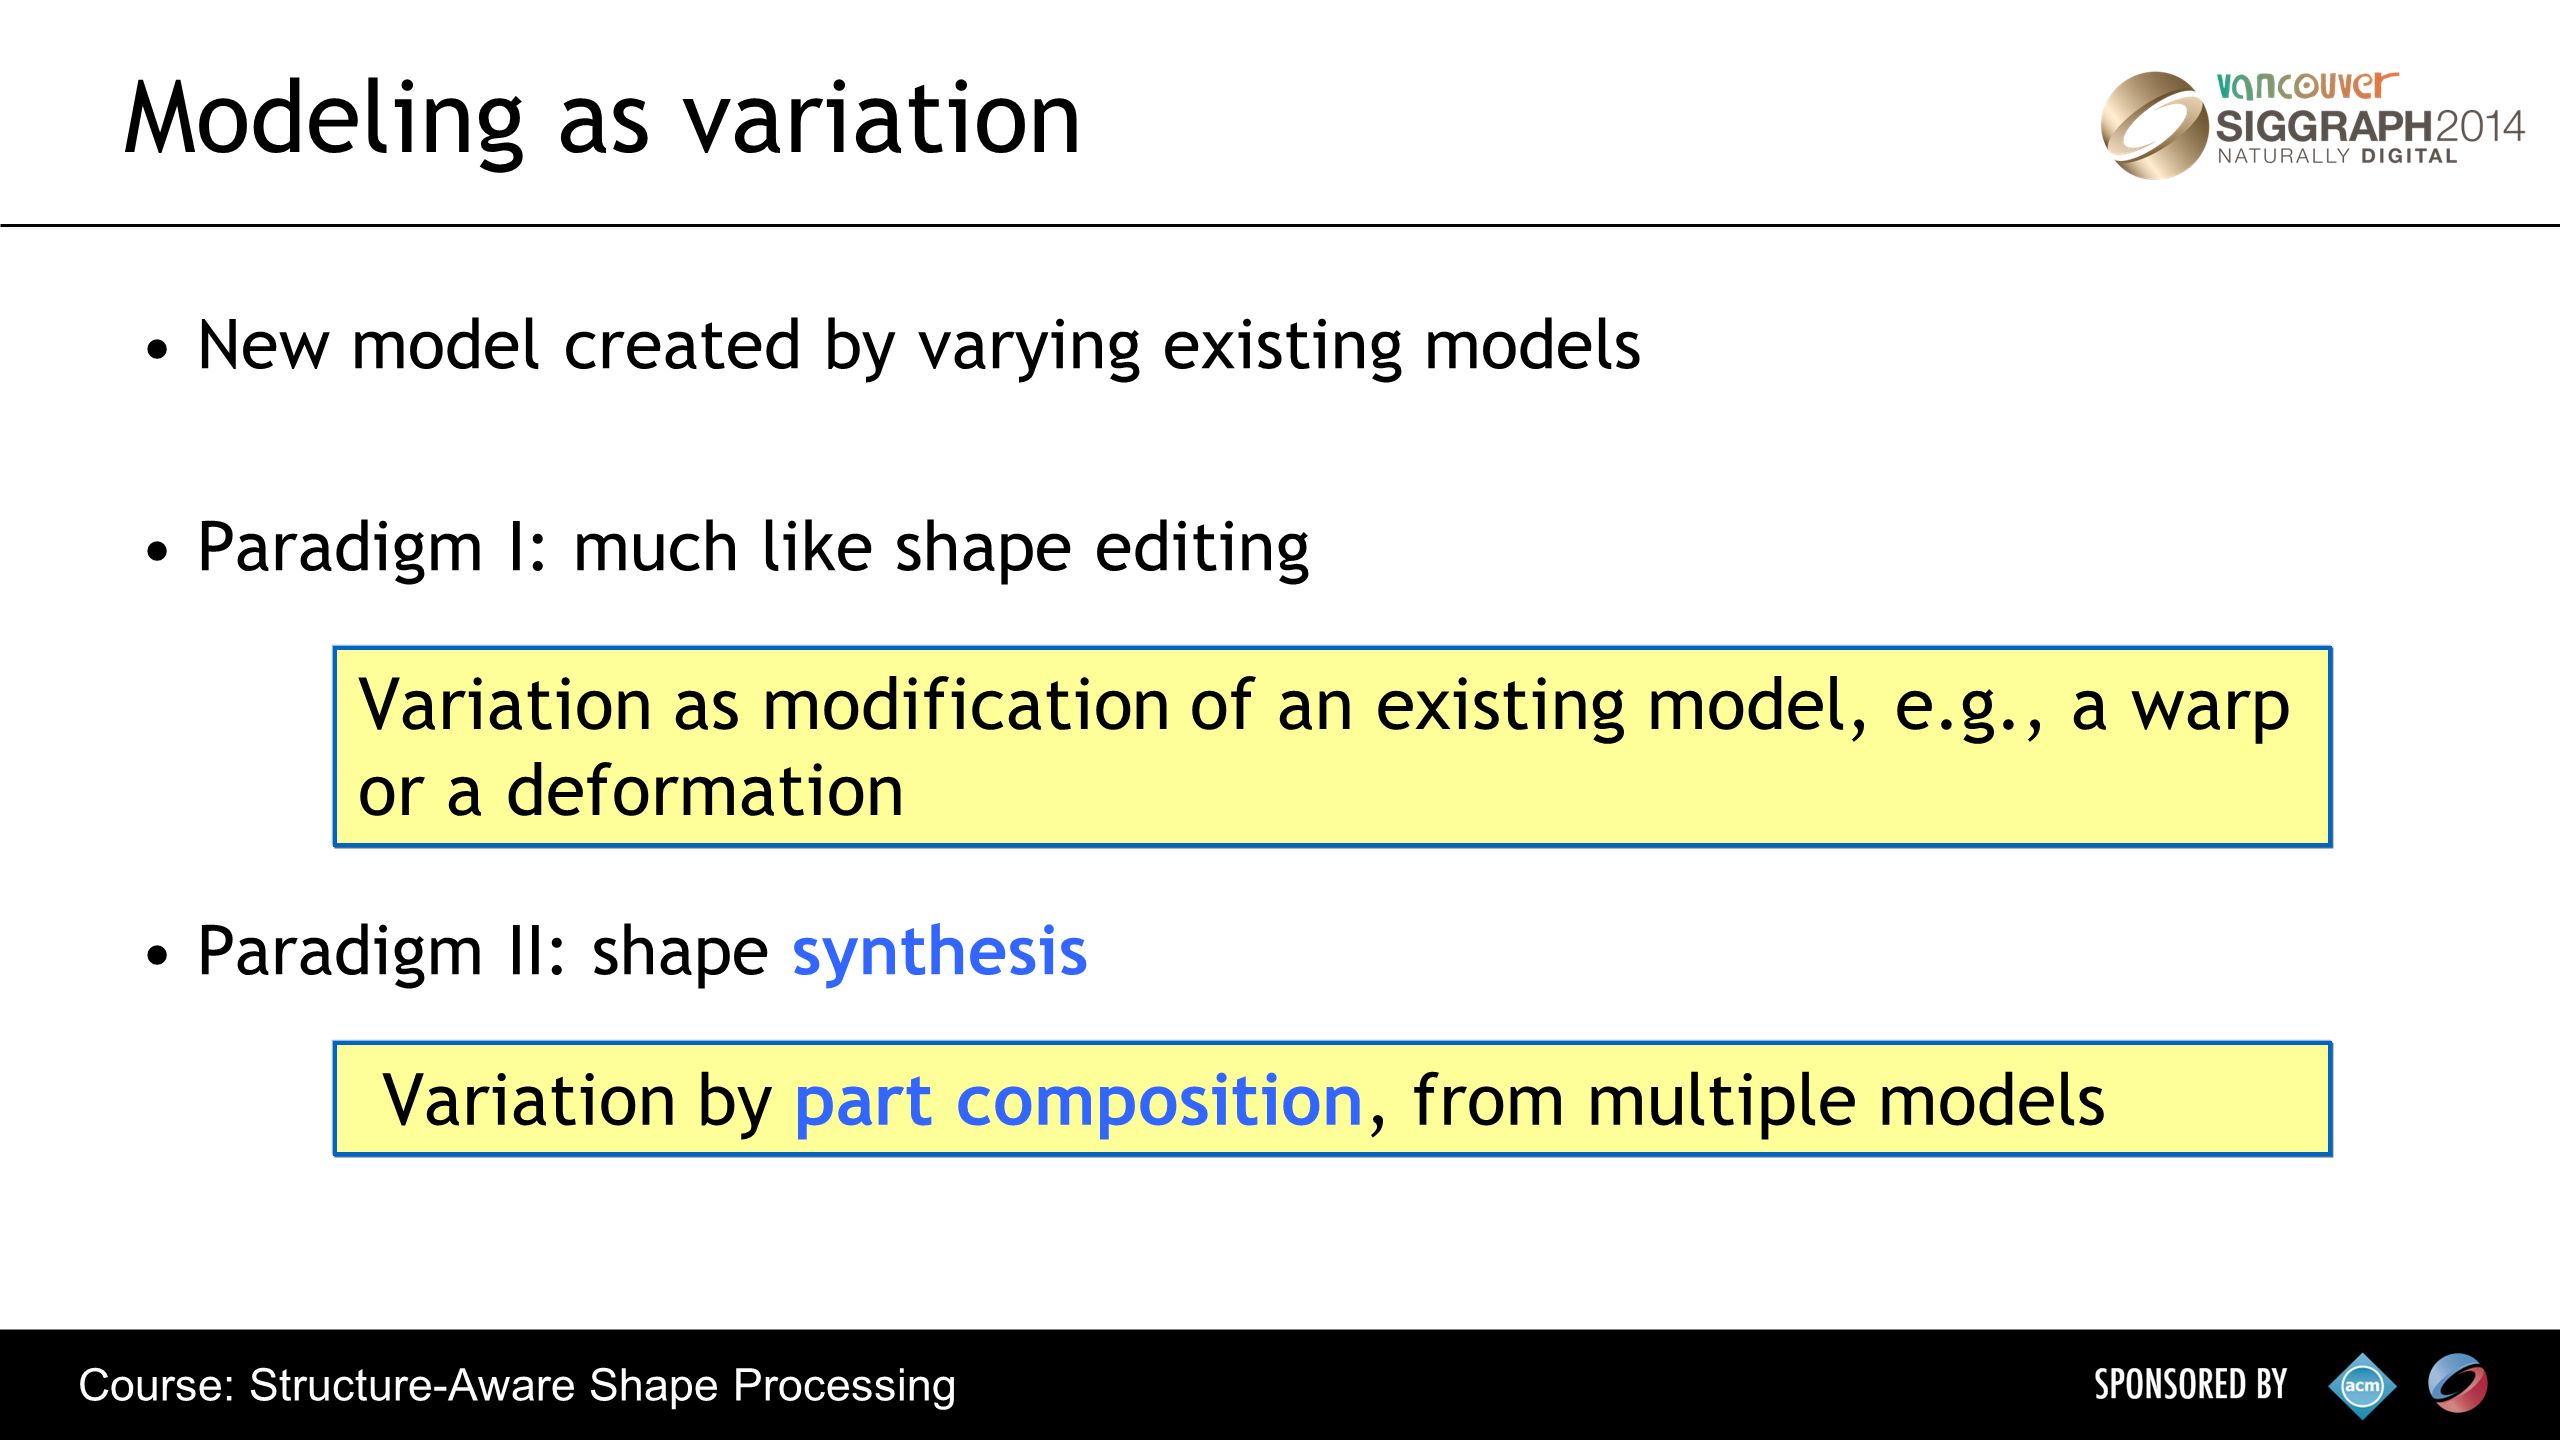 Course: Structure-Aware Shape Processing New model created by varying existing models Paradigm I: much like shape editing Paradigm II: shape synthesis Modeling as variation Variation as modification of an existing model, e.g., a warp or a deformation Variation by part composition, from multiple models